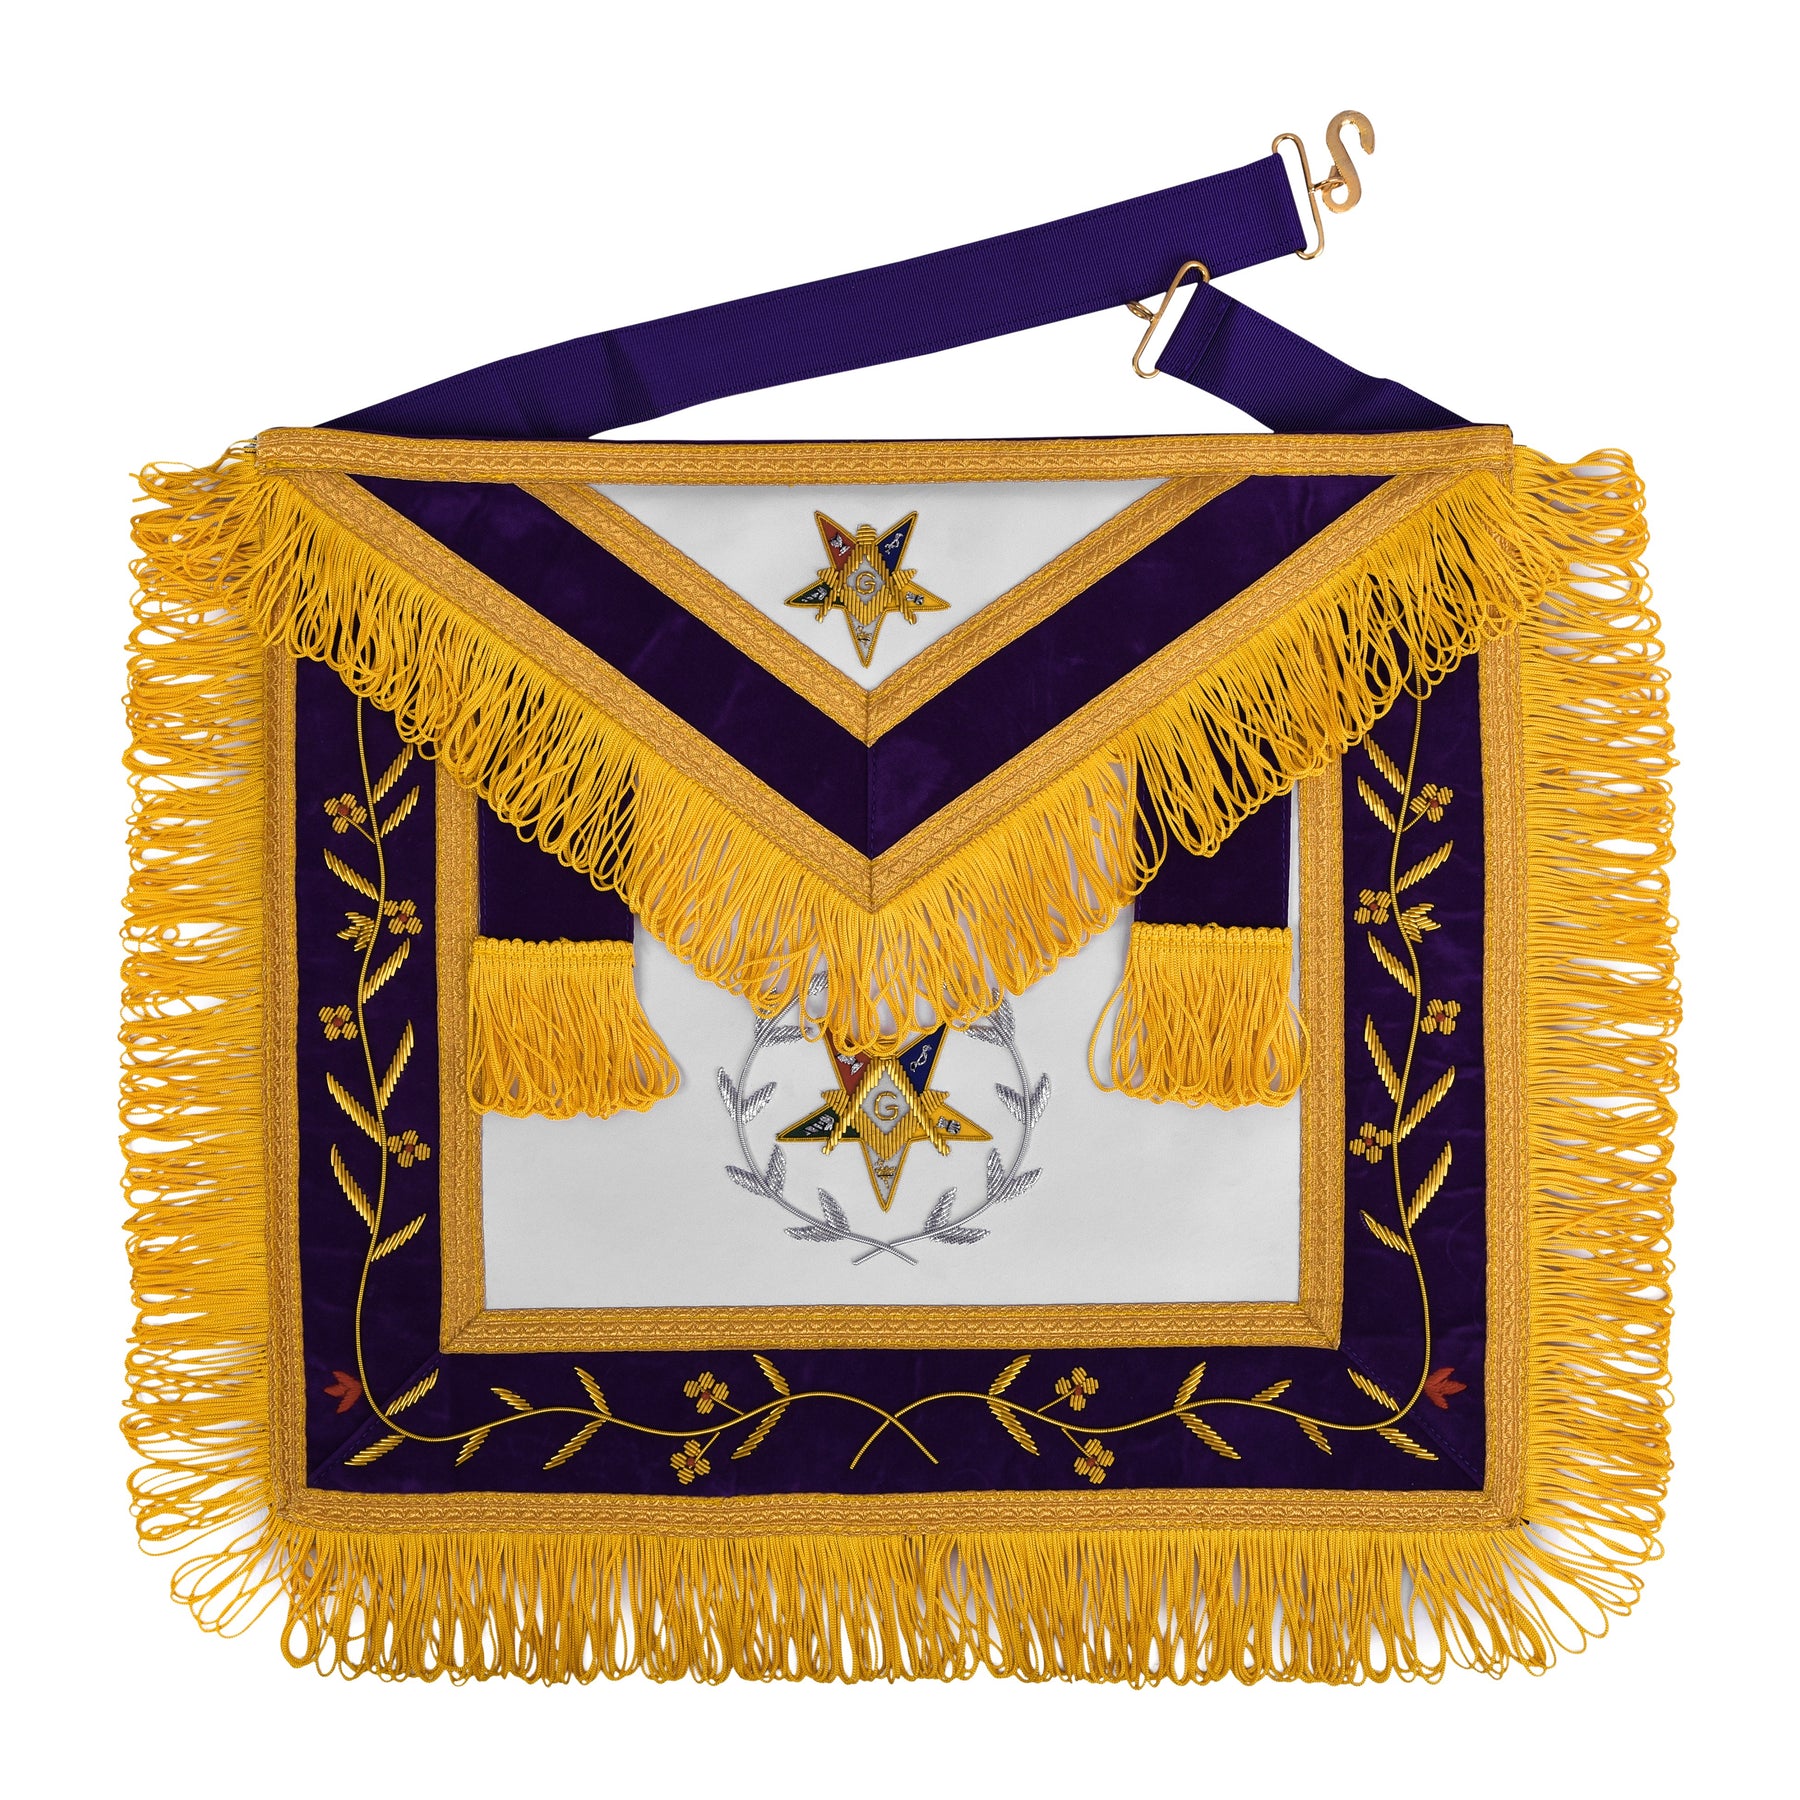 Worthy Patron OES Apron - Purple Velvet With Square & Compass G With Silver Wreath - Bricks Masons